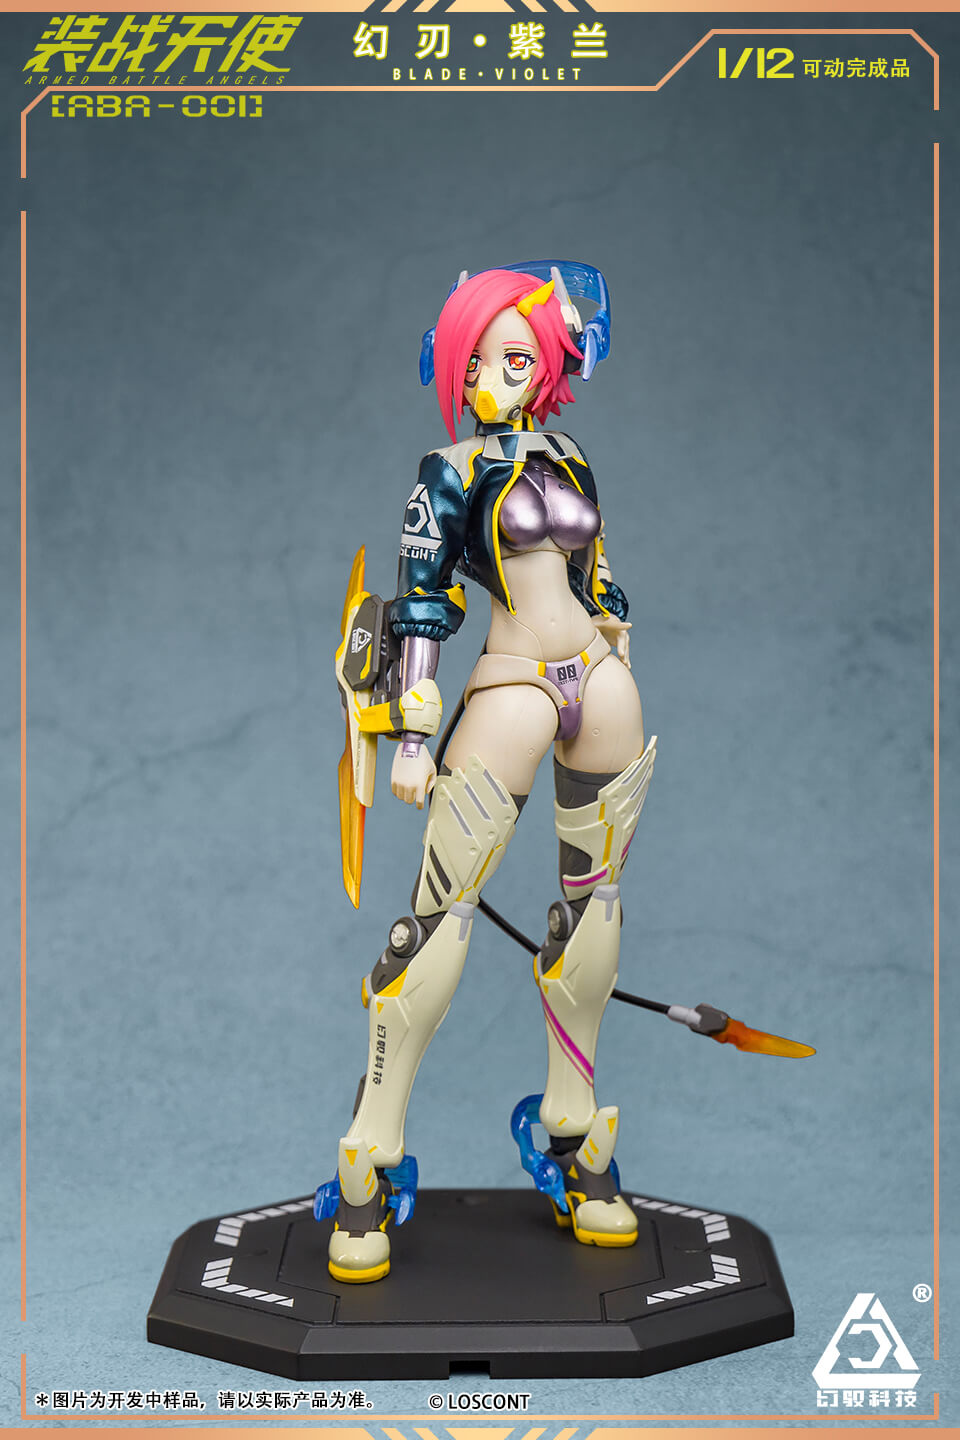 LOSCONT "ARMED BATTLE ANGELS" SERIES ABA-001 BLADE VIOLET 1/12 SCALE ACTION FIGURE | animota